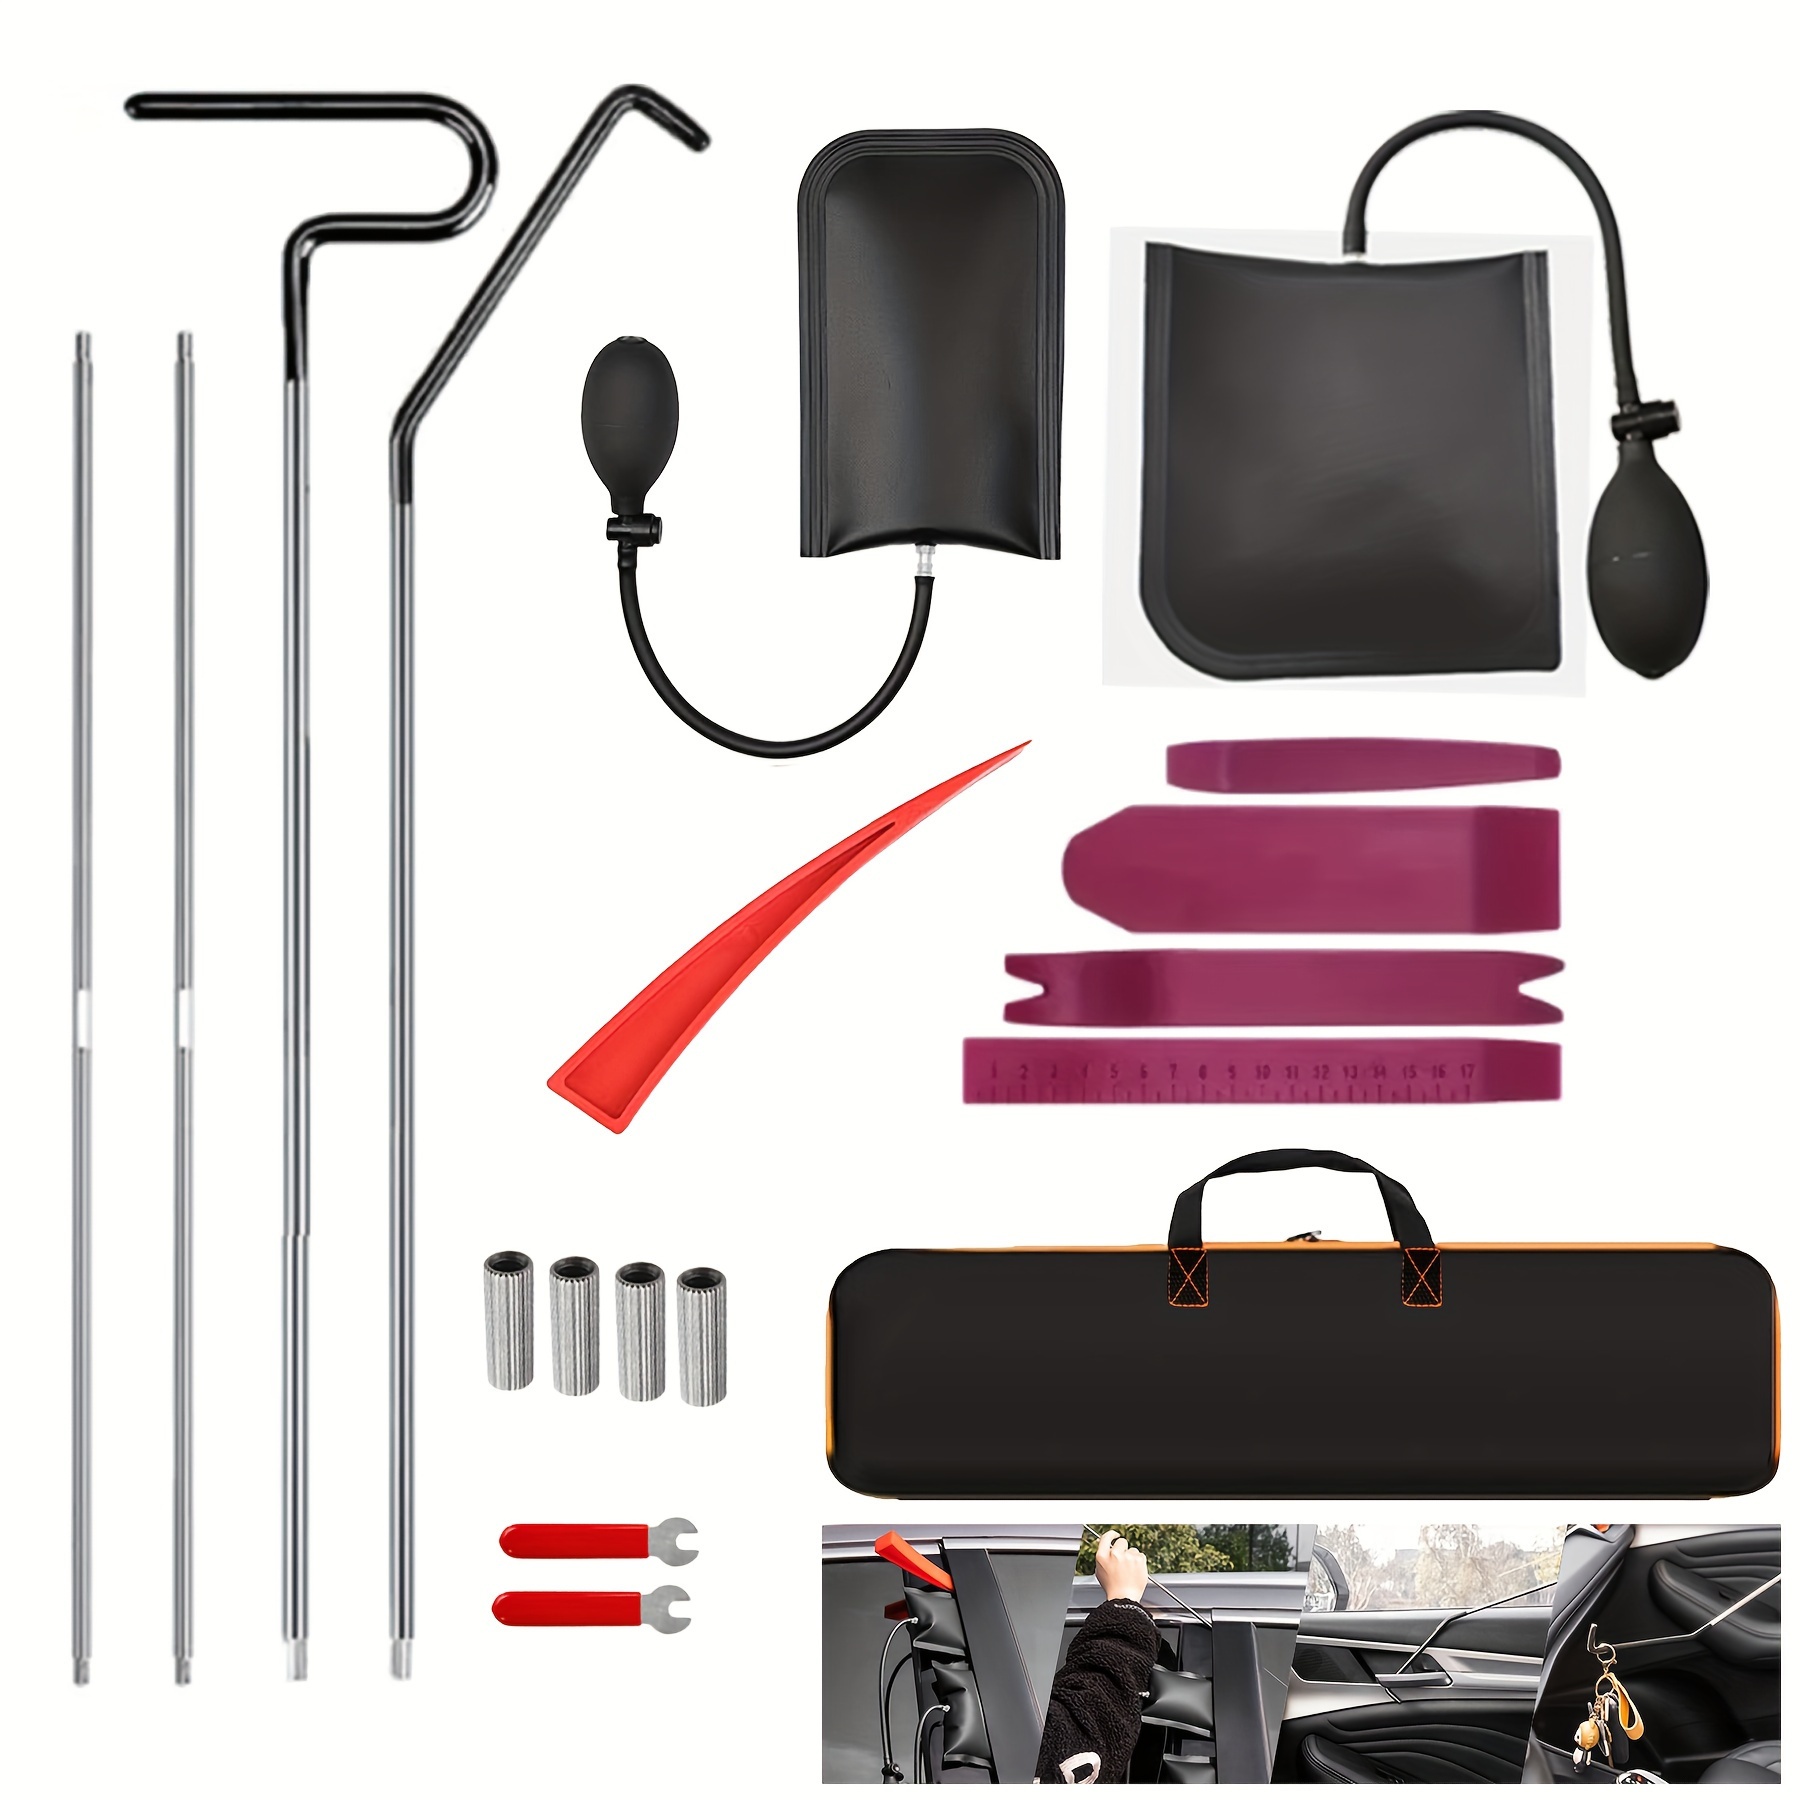 

18 Piece Stainless Steel Car And Truck Emergency Kit With Long Handle Grabber - Essential Roadside Kit, Airbag Portable Kit